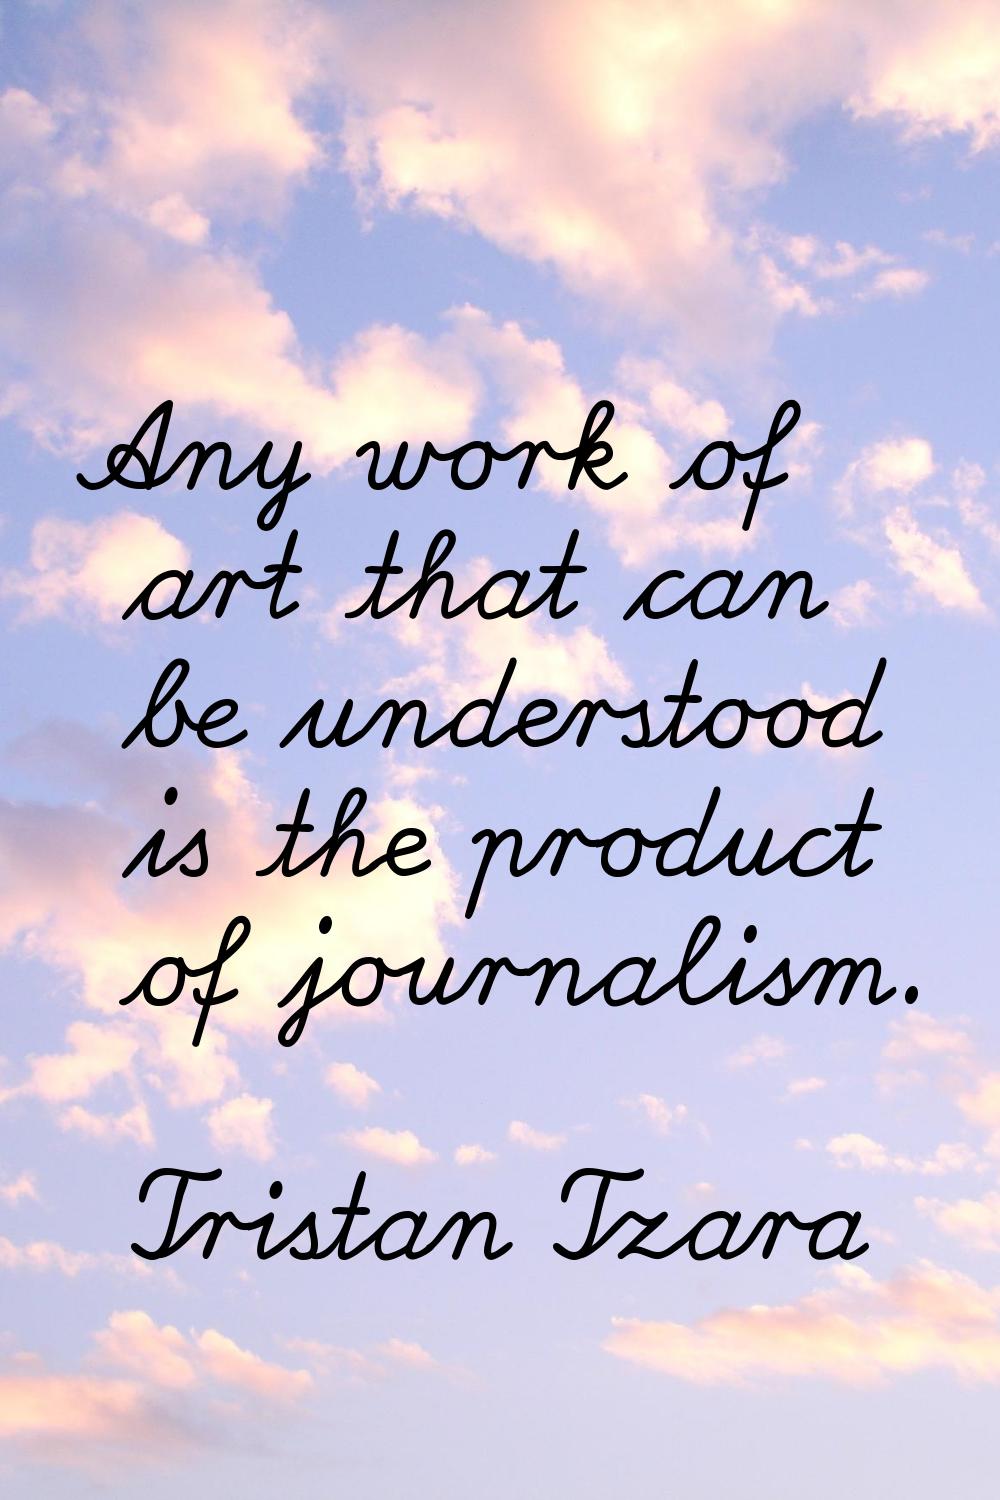 Any work of art that can be understood is the product of journalism.